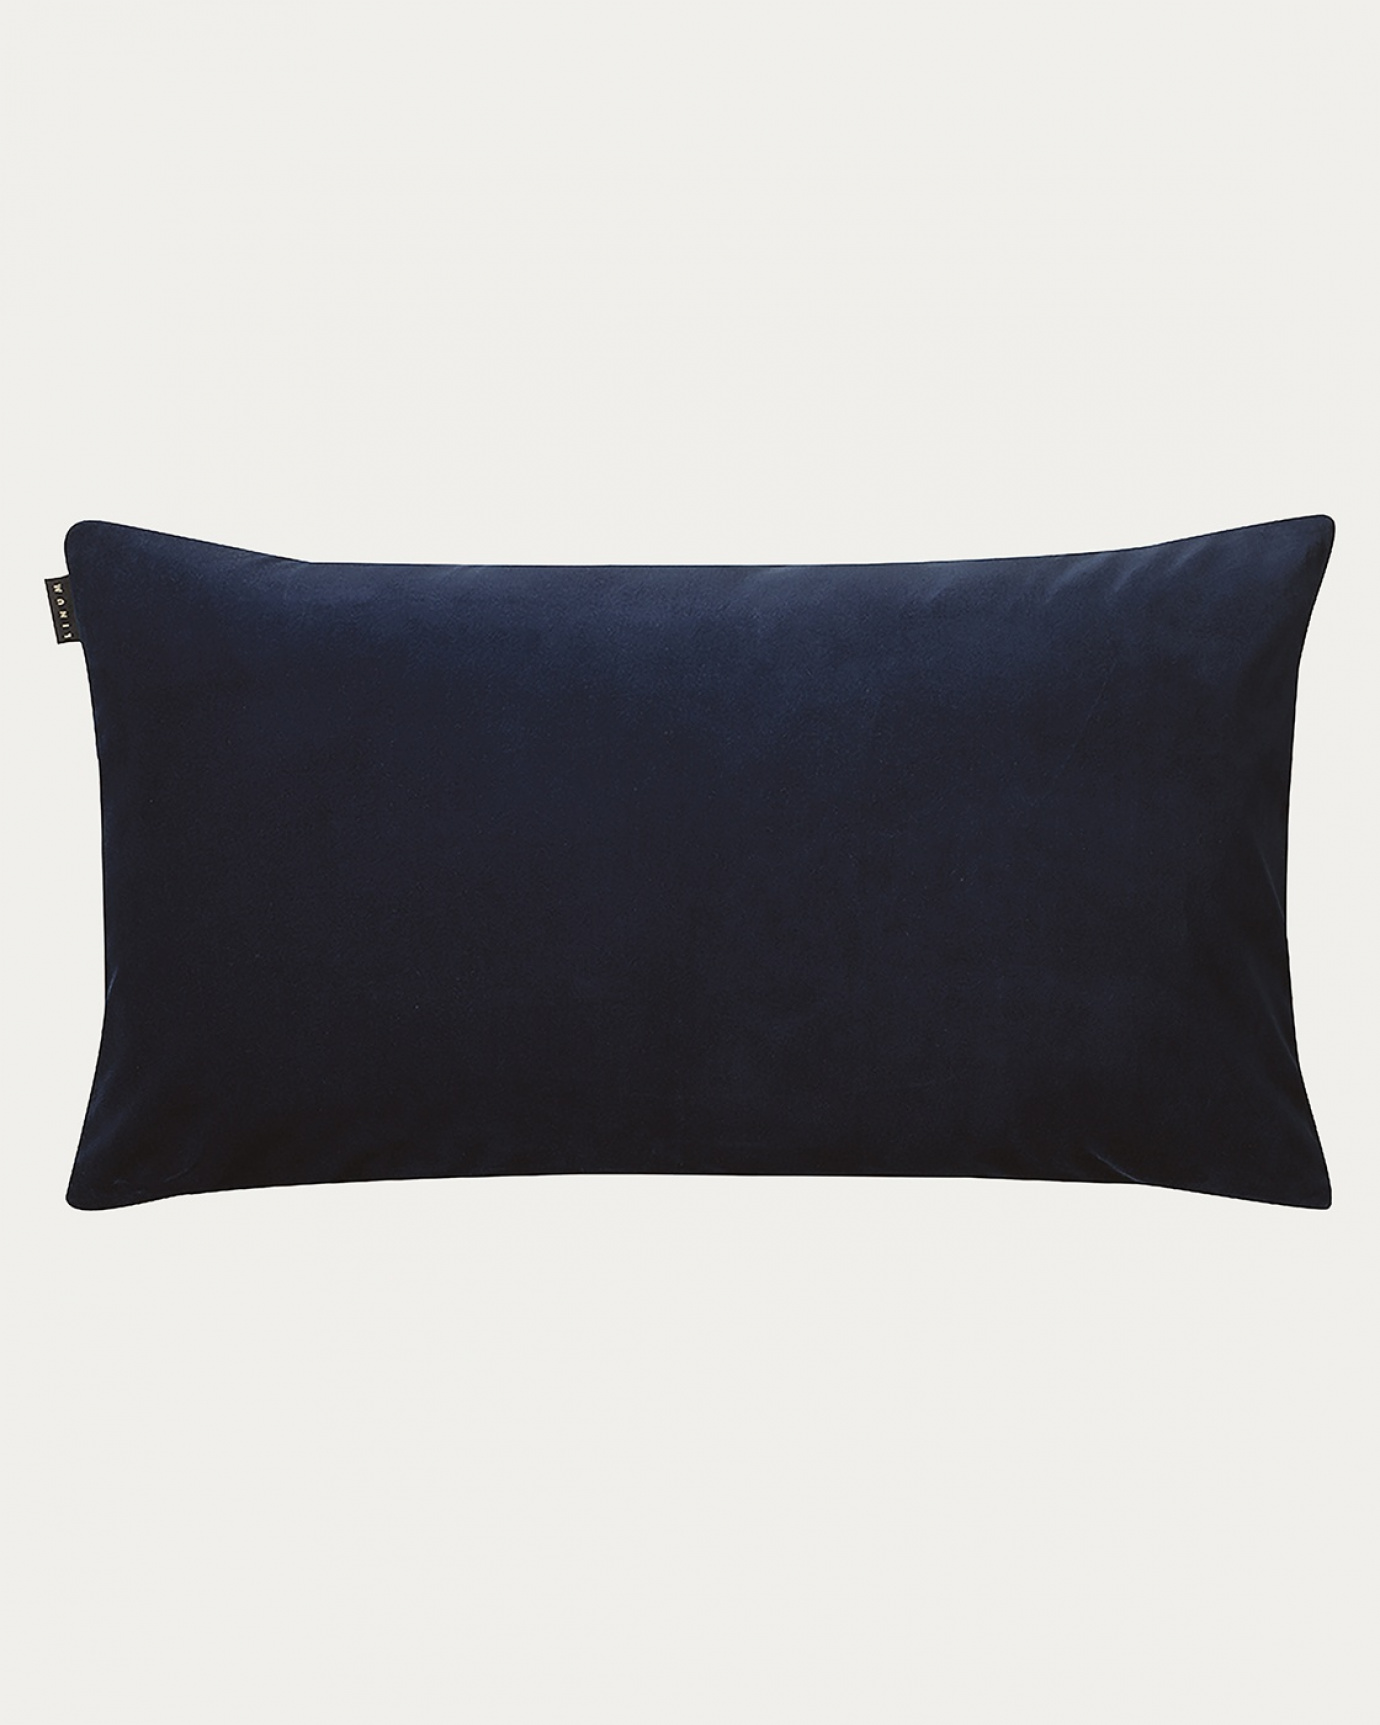 Product image ink blue PAOLO cushion cover made of soft cotton velvet and 100% linen from LINUM DESIGN. Size 50x90 cm.